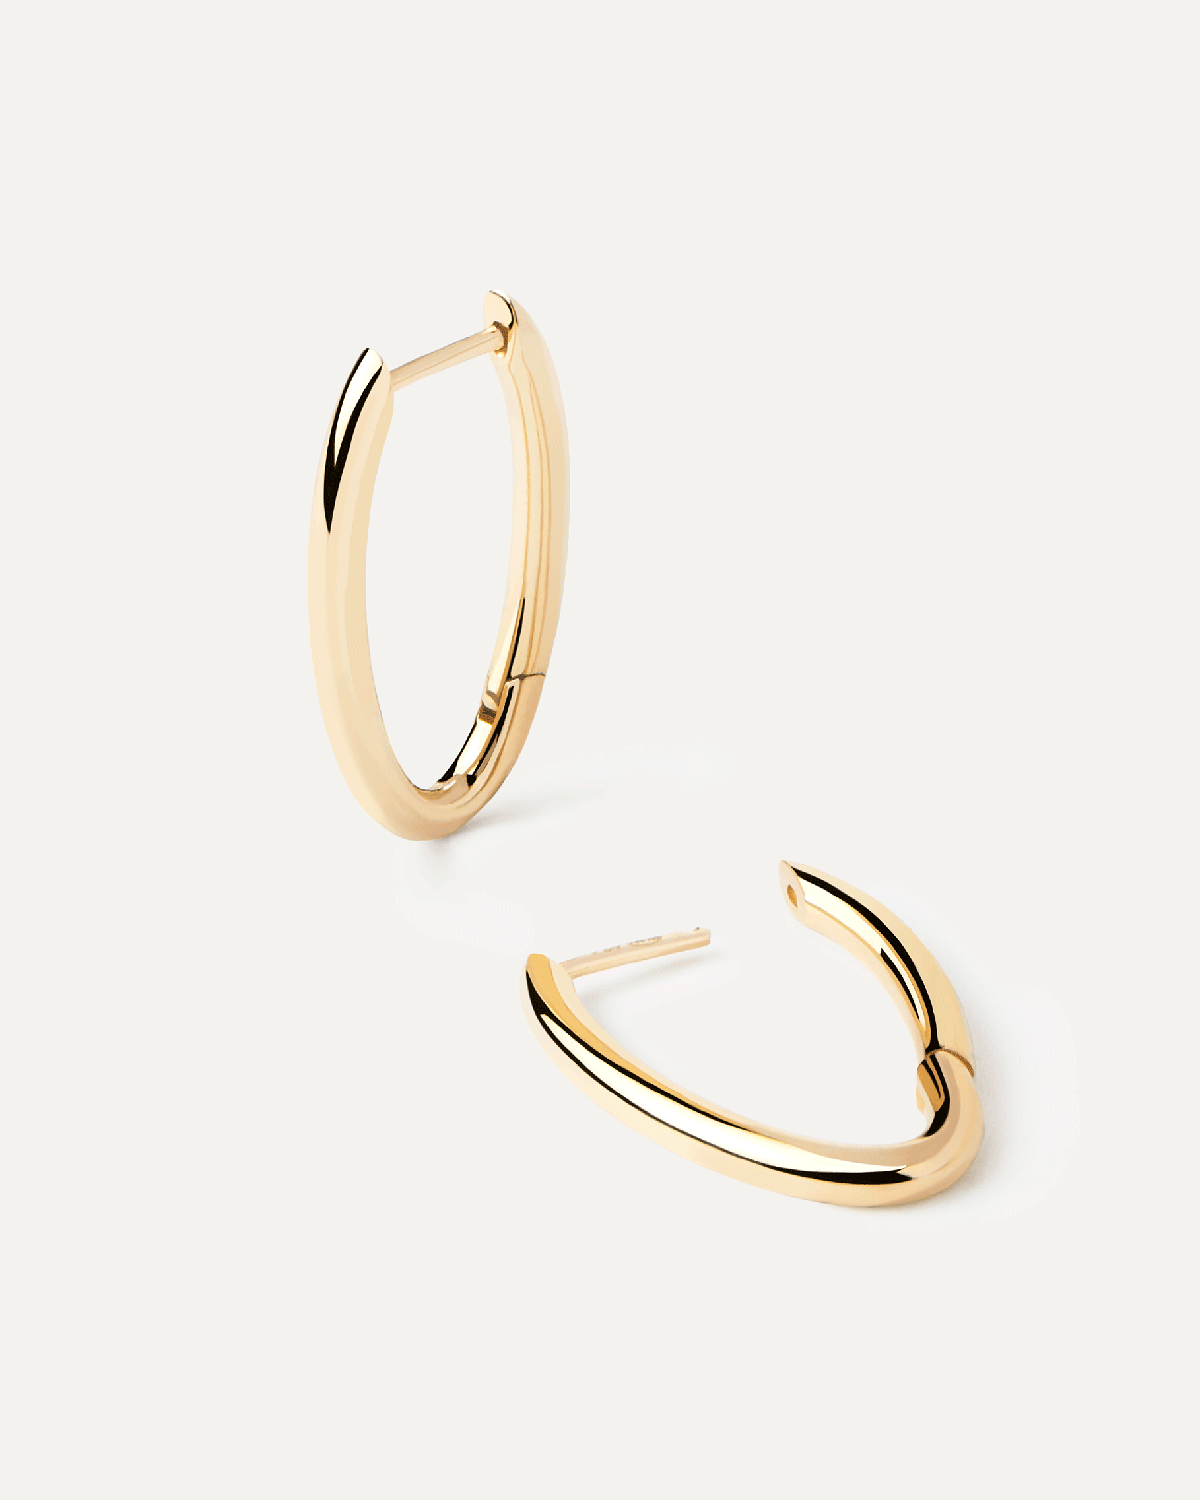 2024 Selection | Gold Vera Hoops. Distinctive oval shape hoop earrings in solid yellow gold. Get the latest arrival from PDPAOLA. Place your order safely and get this Best Seller. Free Shipping.